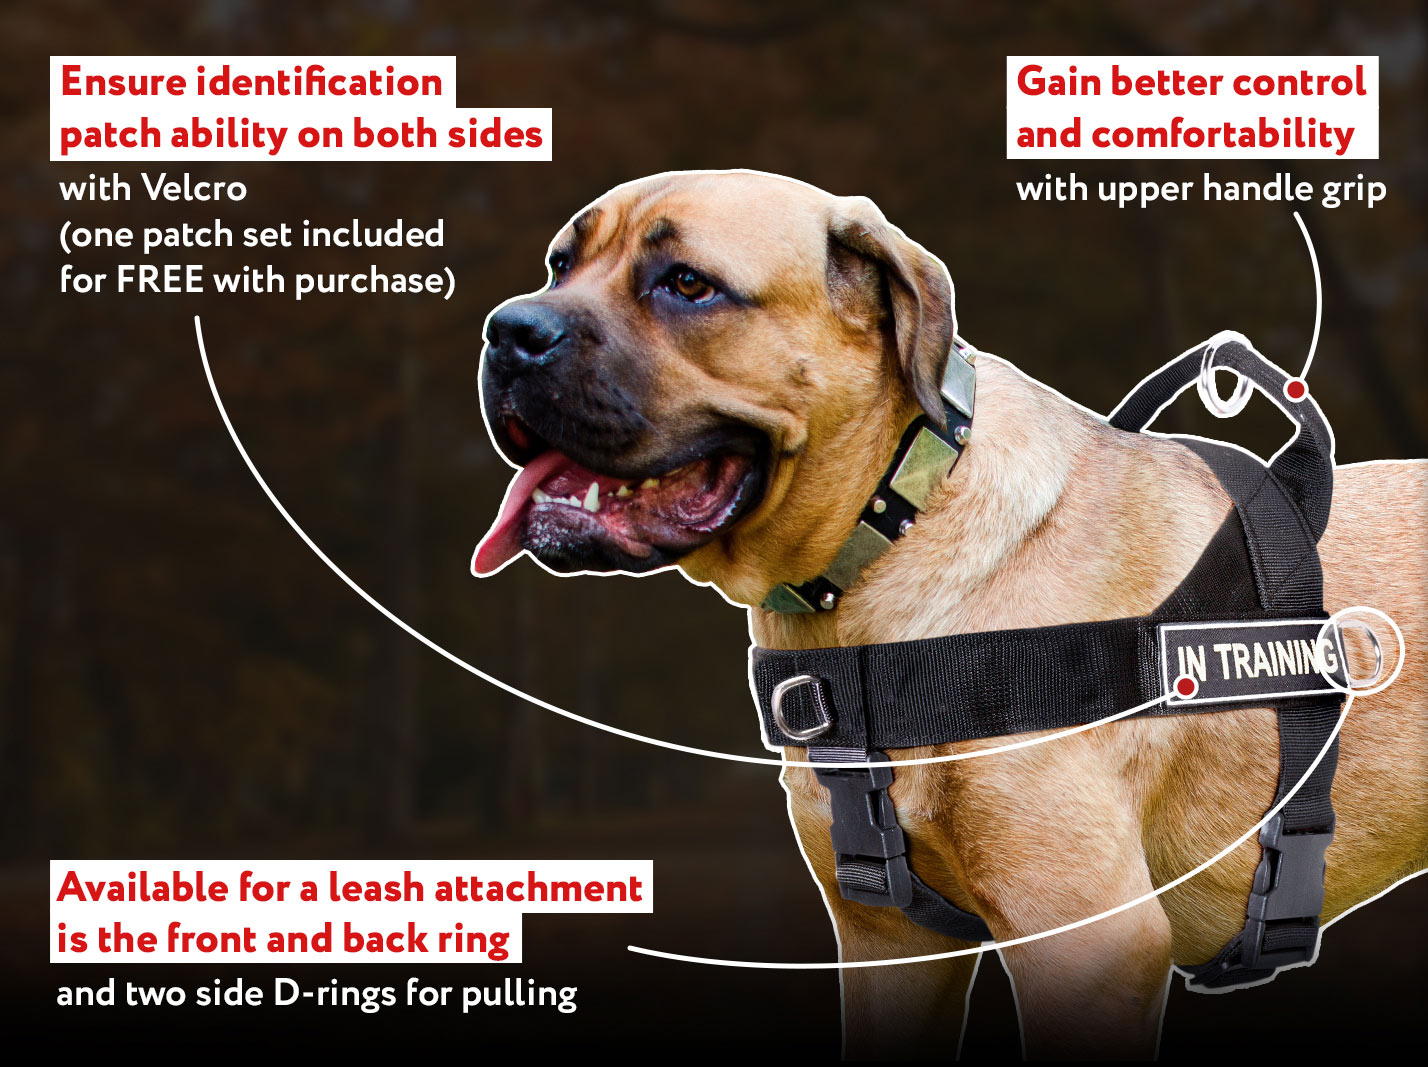 SAR Harness for All Breeds - Search&Rescue Nylon Dog Harness [H17##1092  Harness with id patches] : Custom dog harnesses for Pulling, Training,  Tracking, Walking